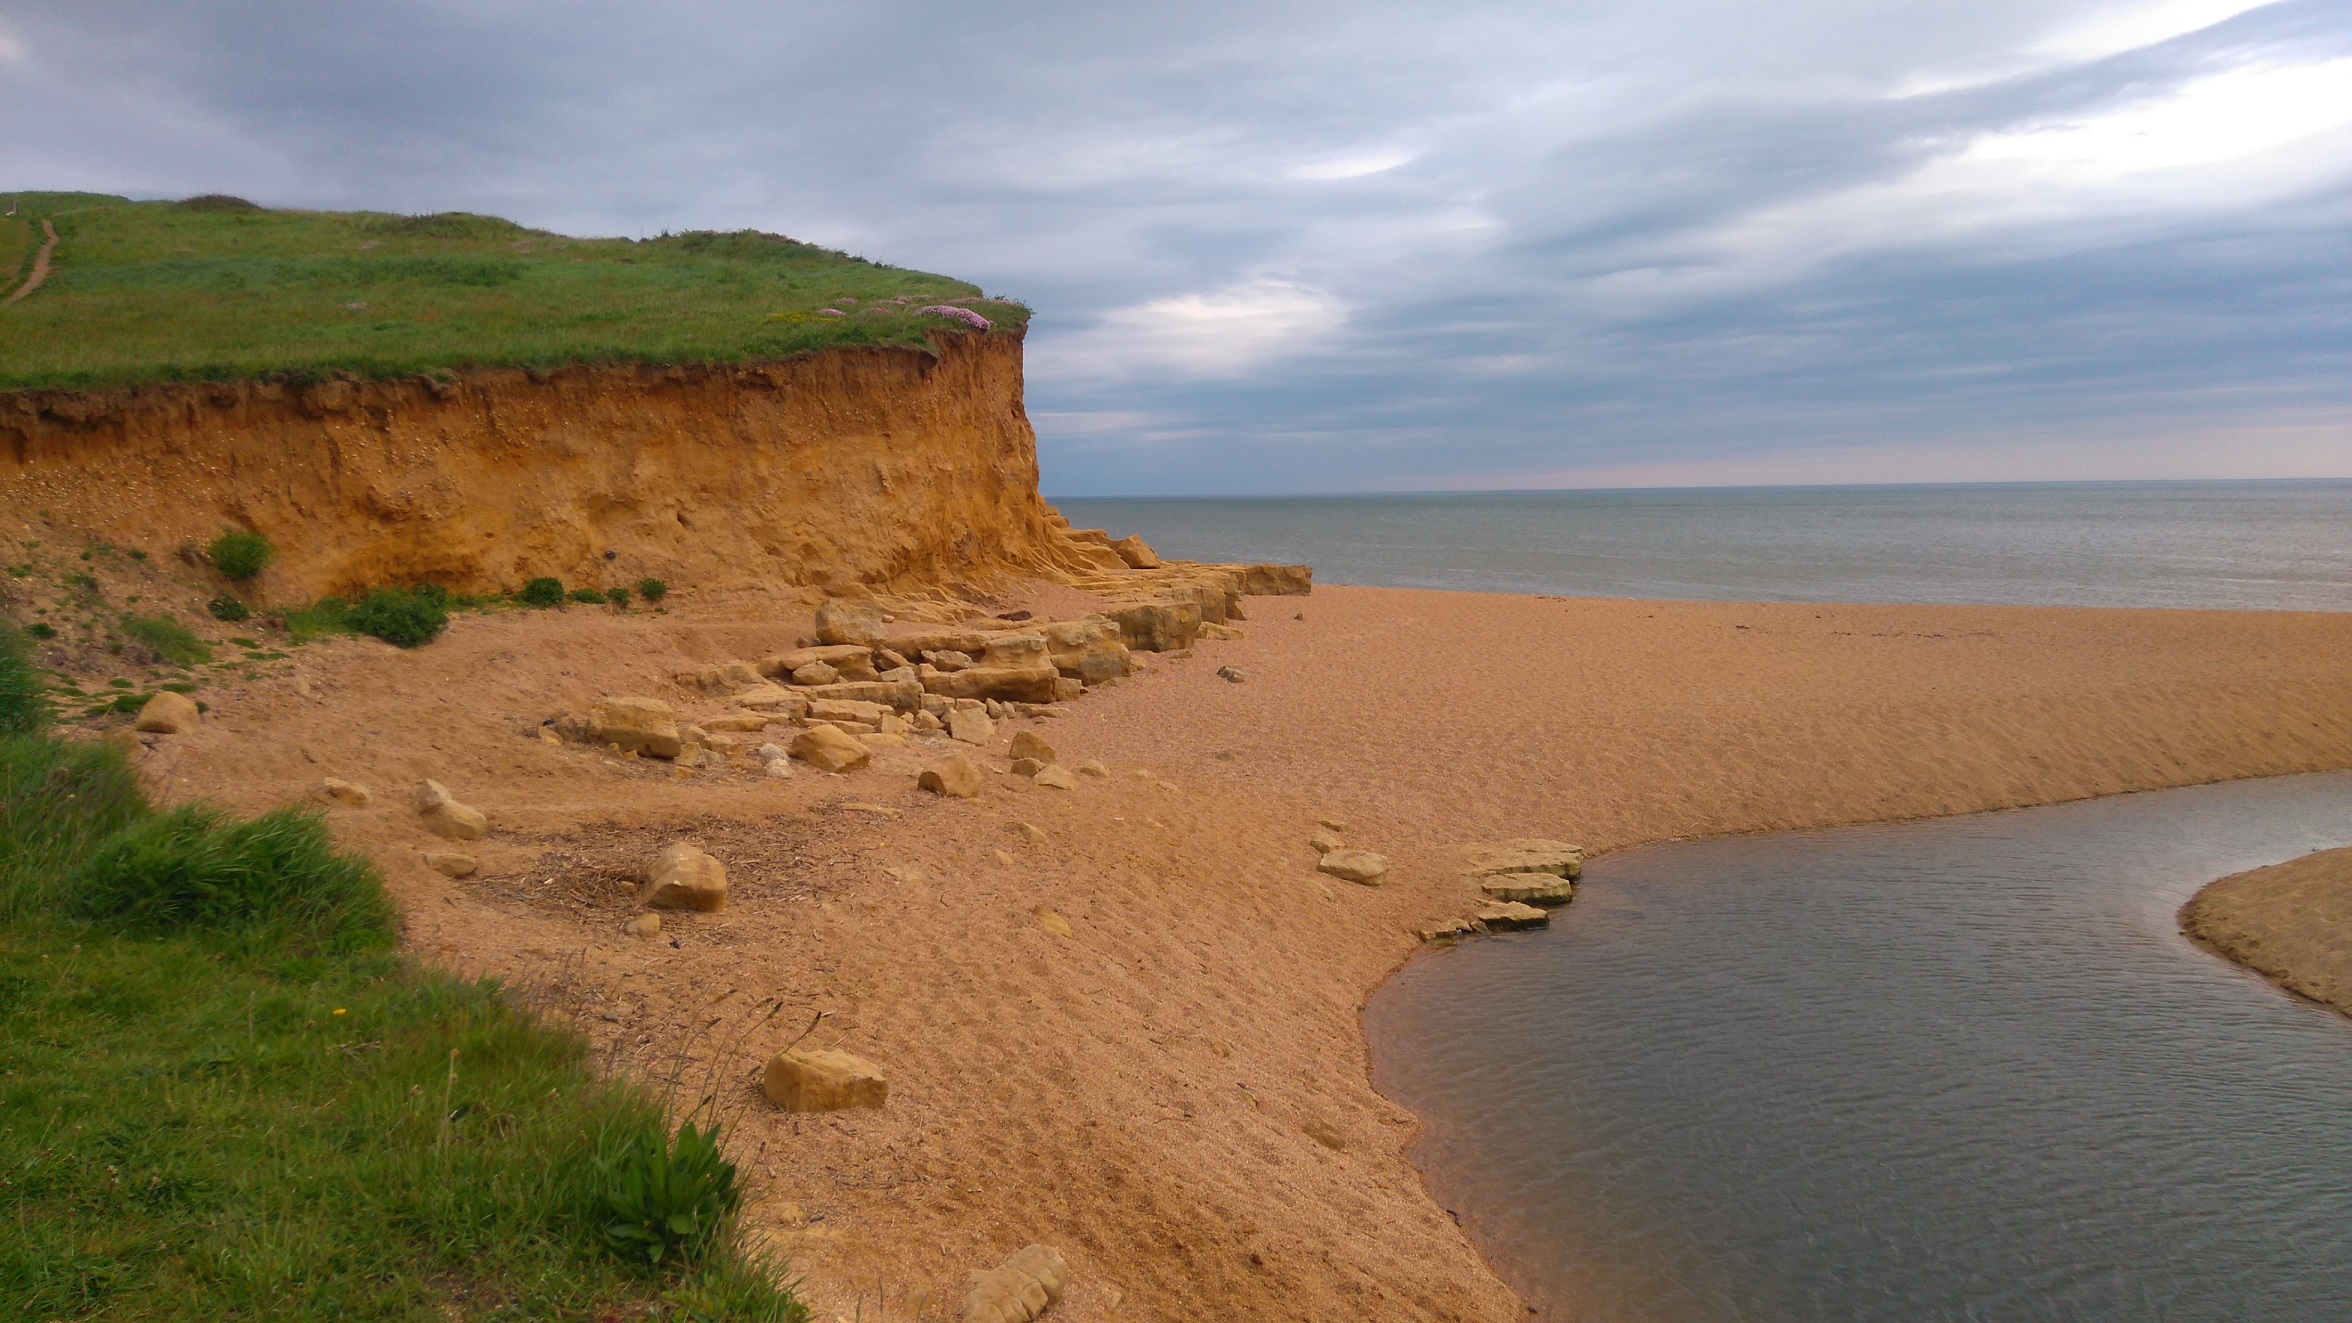 A small cliff by a beach with grassy clifftops under a cloudy sky. The sea is present in the background, while a small waterway is visible on the right.